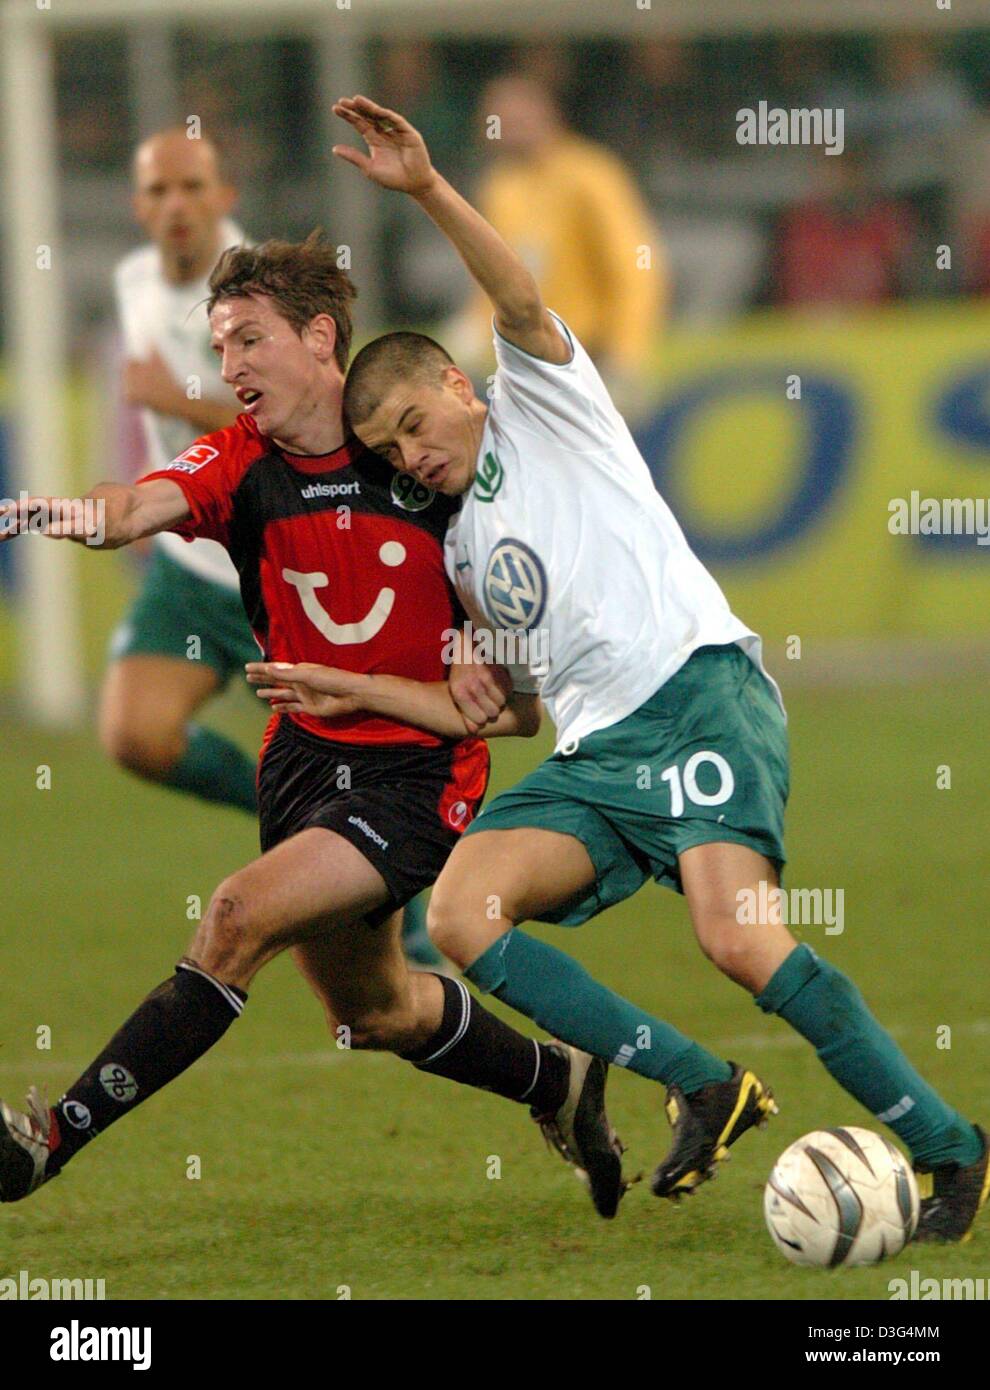 (dpa) - Wolfsburg's Argentine midfielder Andres D'Alessandro (R) struggles for the ball with Hanover's forward Daniel Stendel, who scored Hanover's 0-1 lead goal, during the Bundesliga soccer game VfL Wolfsburg against Hannover 96 in Wolfsburg, Germany , 14 December 2003. In the end, Hanover lost the game by a score of 1-2. Stock Photo